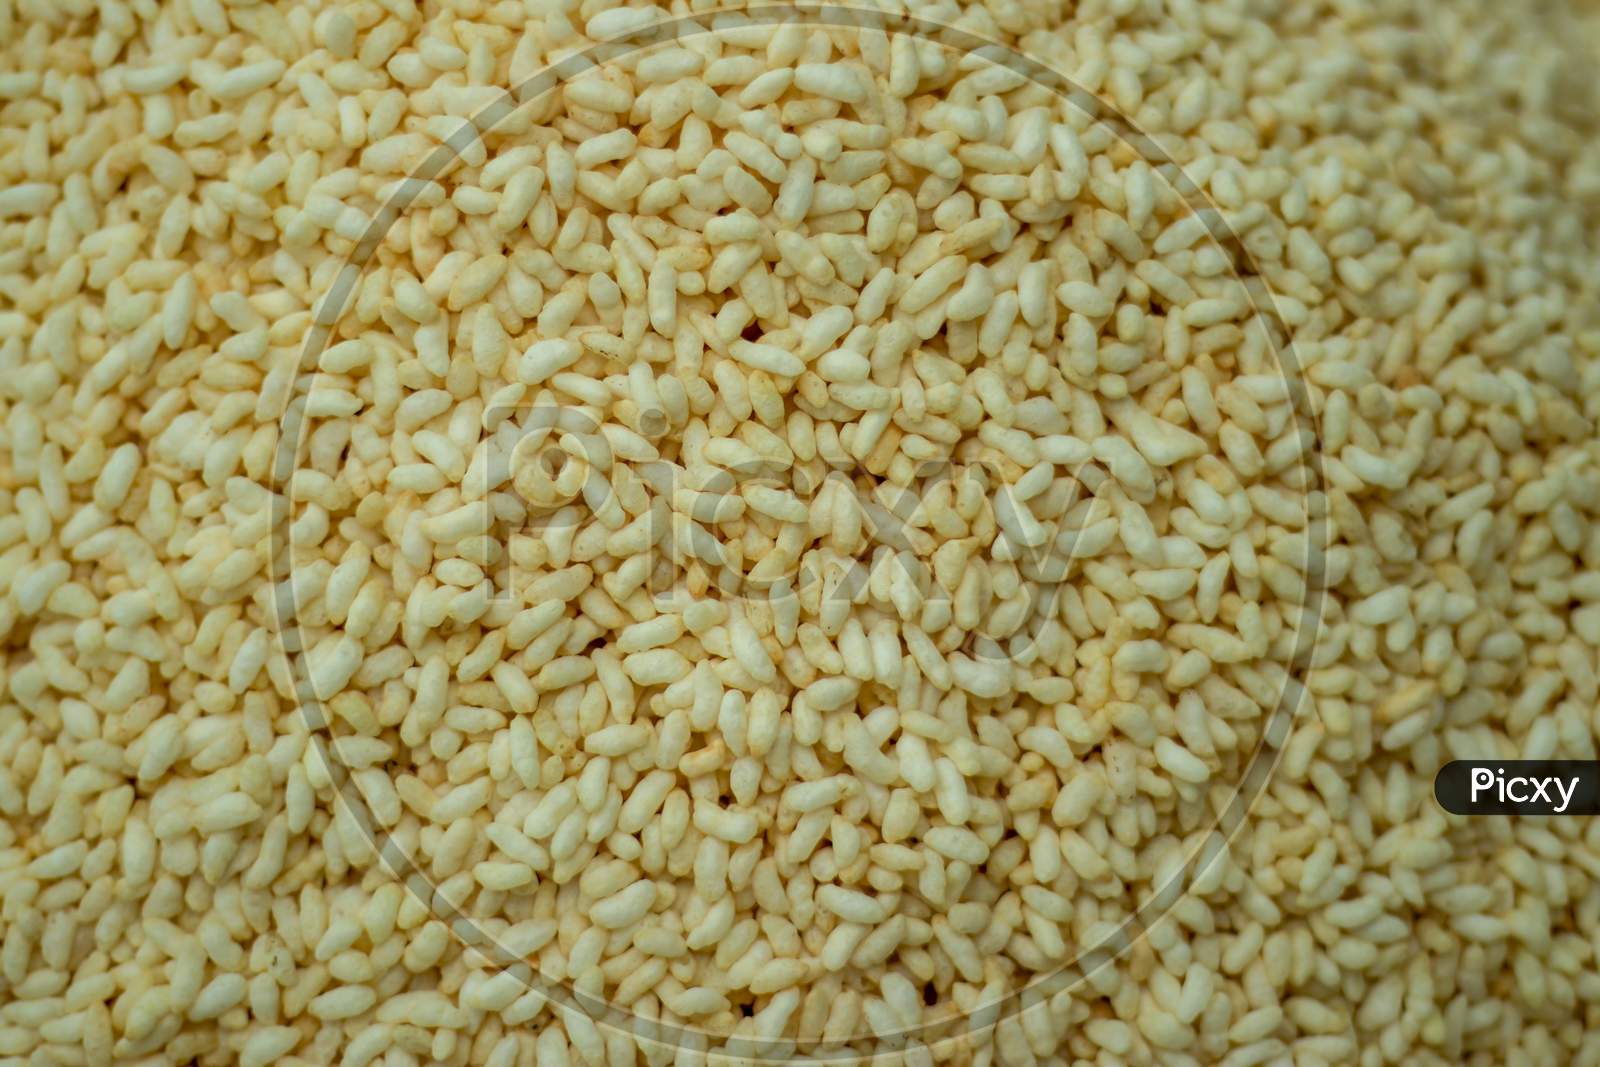 Muri Or Puffed White Rice Is Famous Savory Of Asia Subcontinent Food